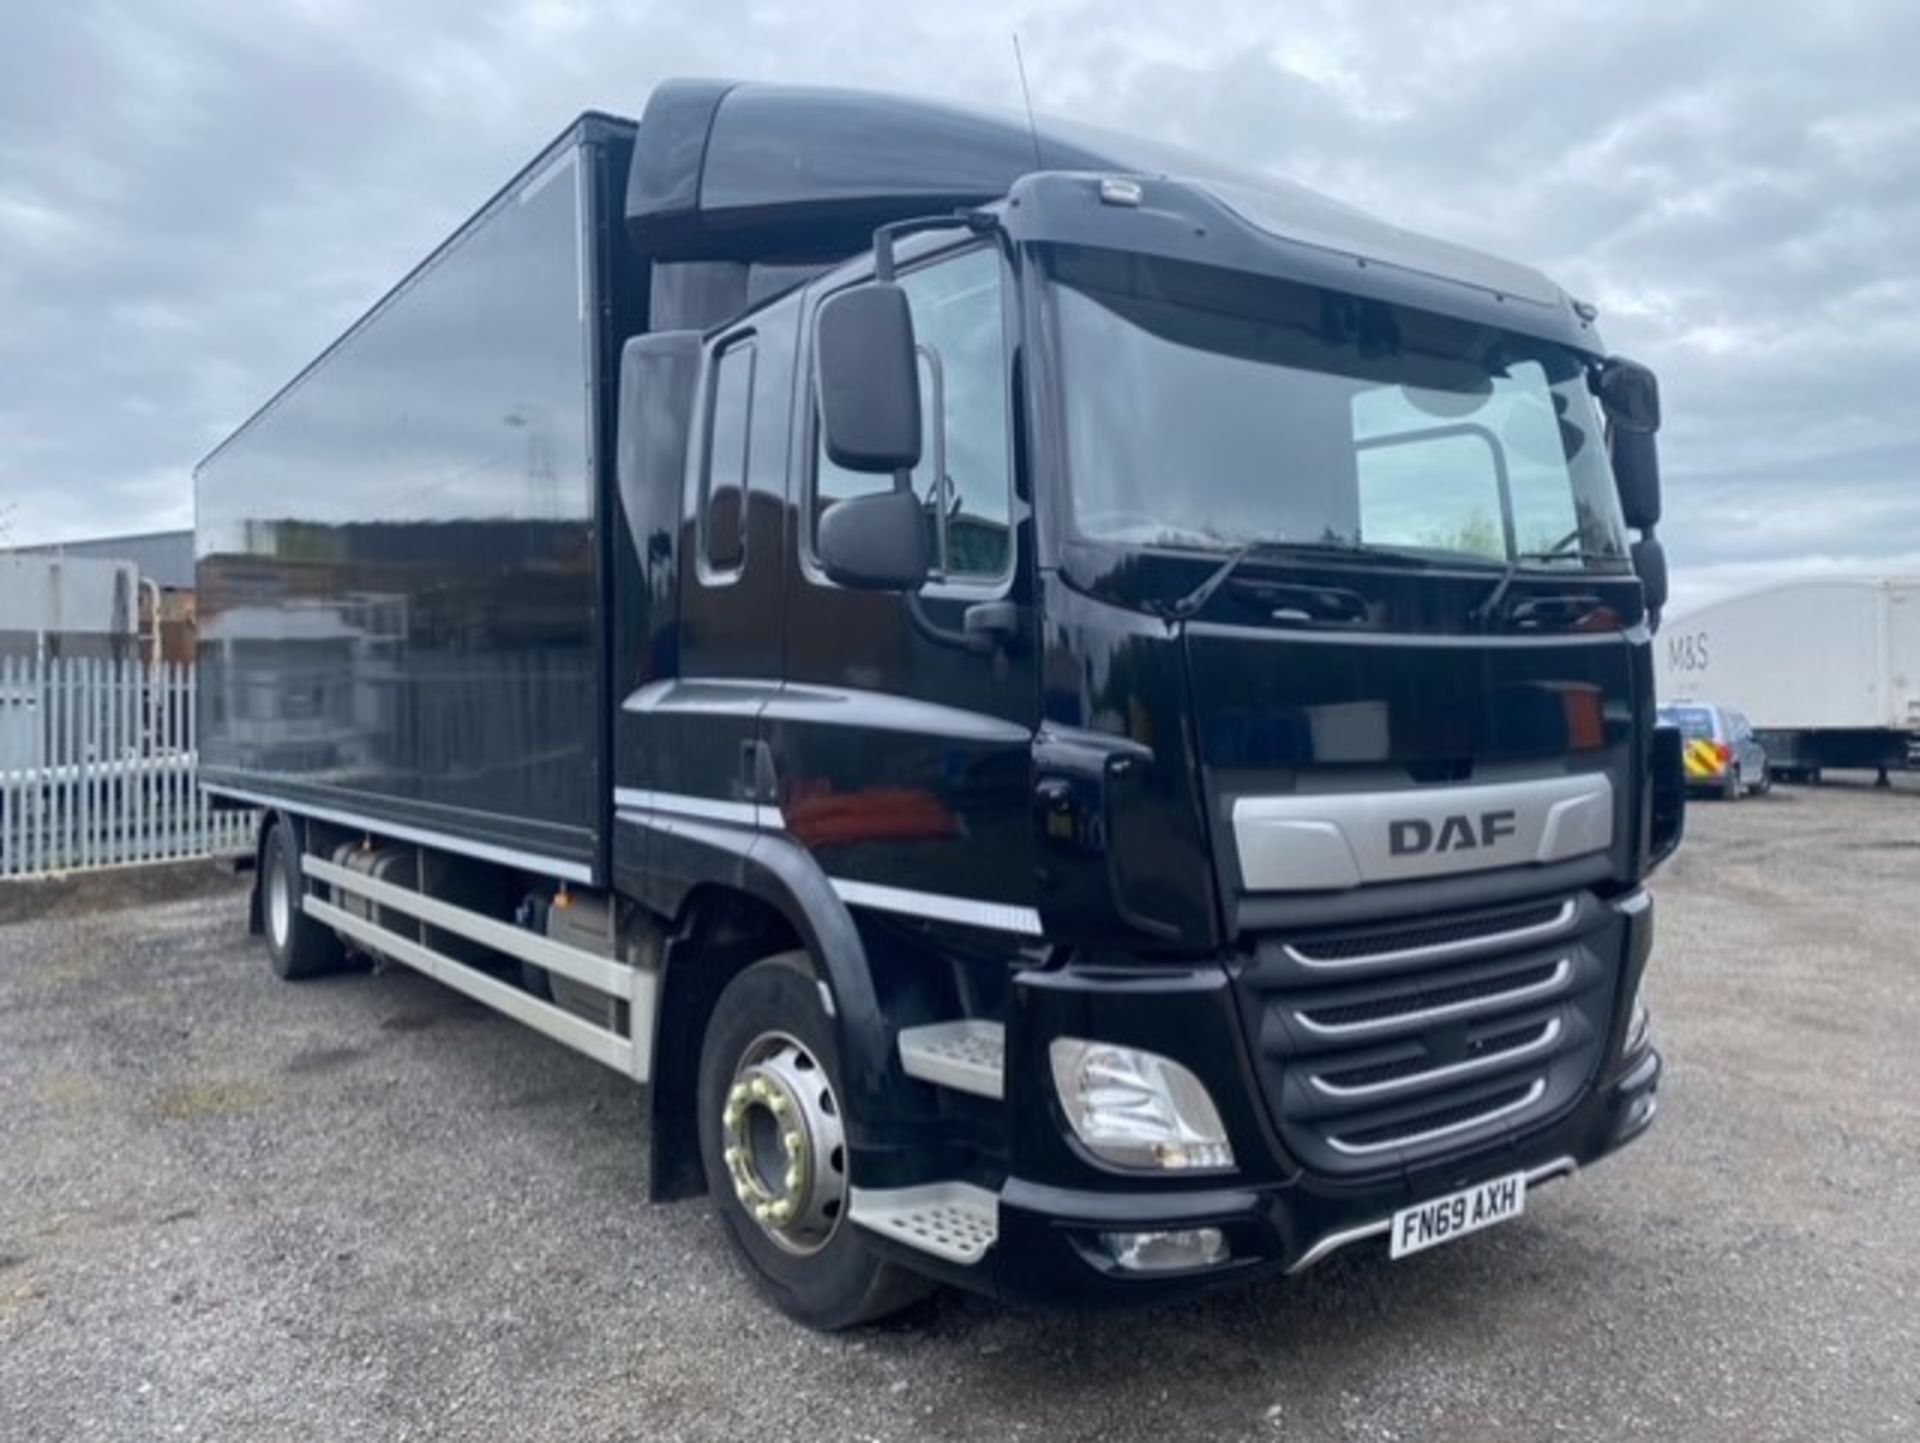 2019, DAF CF 260 FA (Ex-Fleet Owned & Maintained) - FN69 AXH (18 Ton Rigid Truck with Tail Lift) - Image 21 of 22